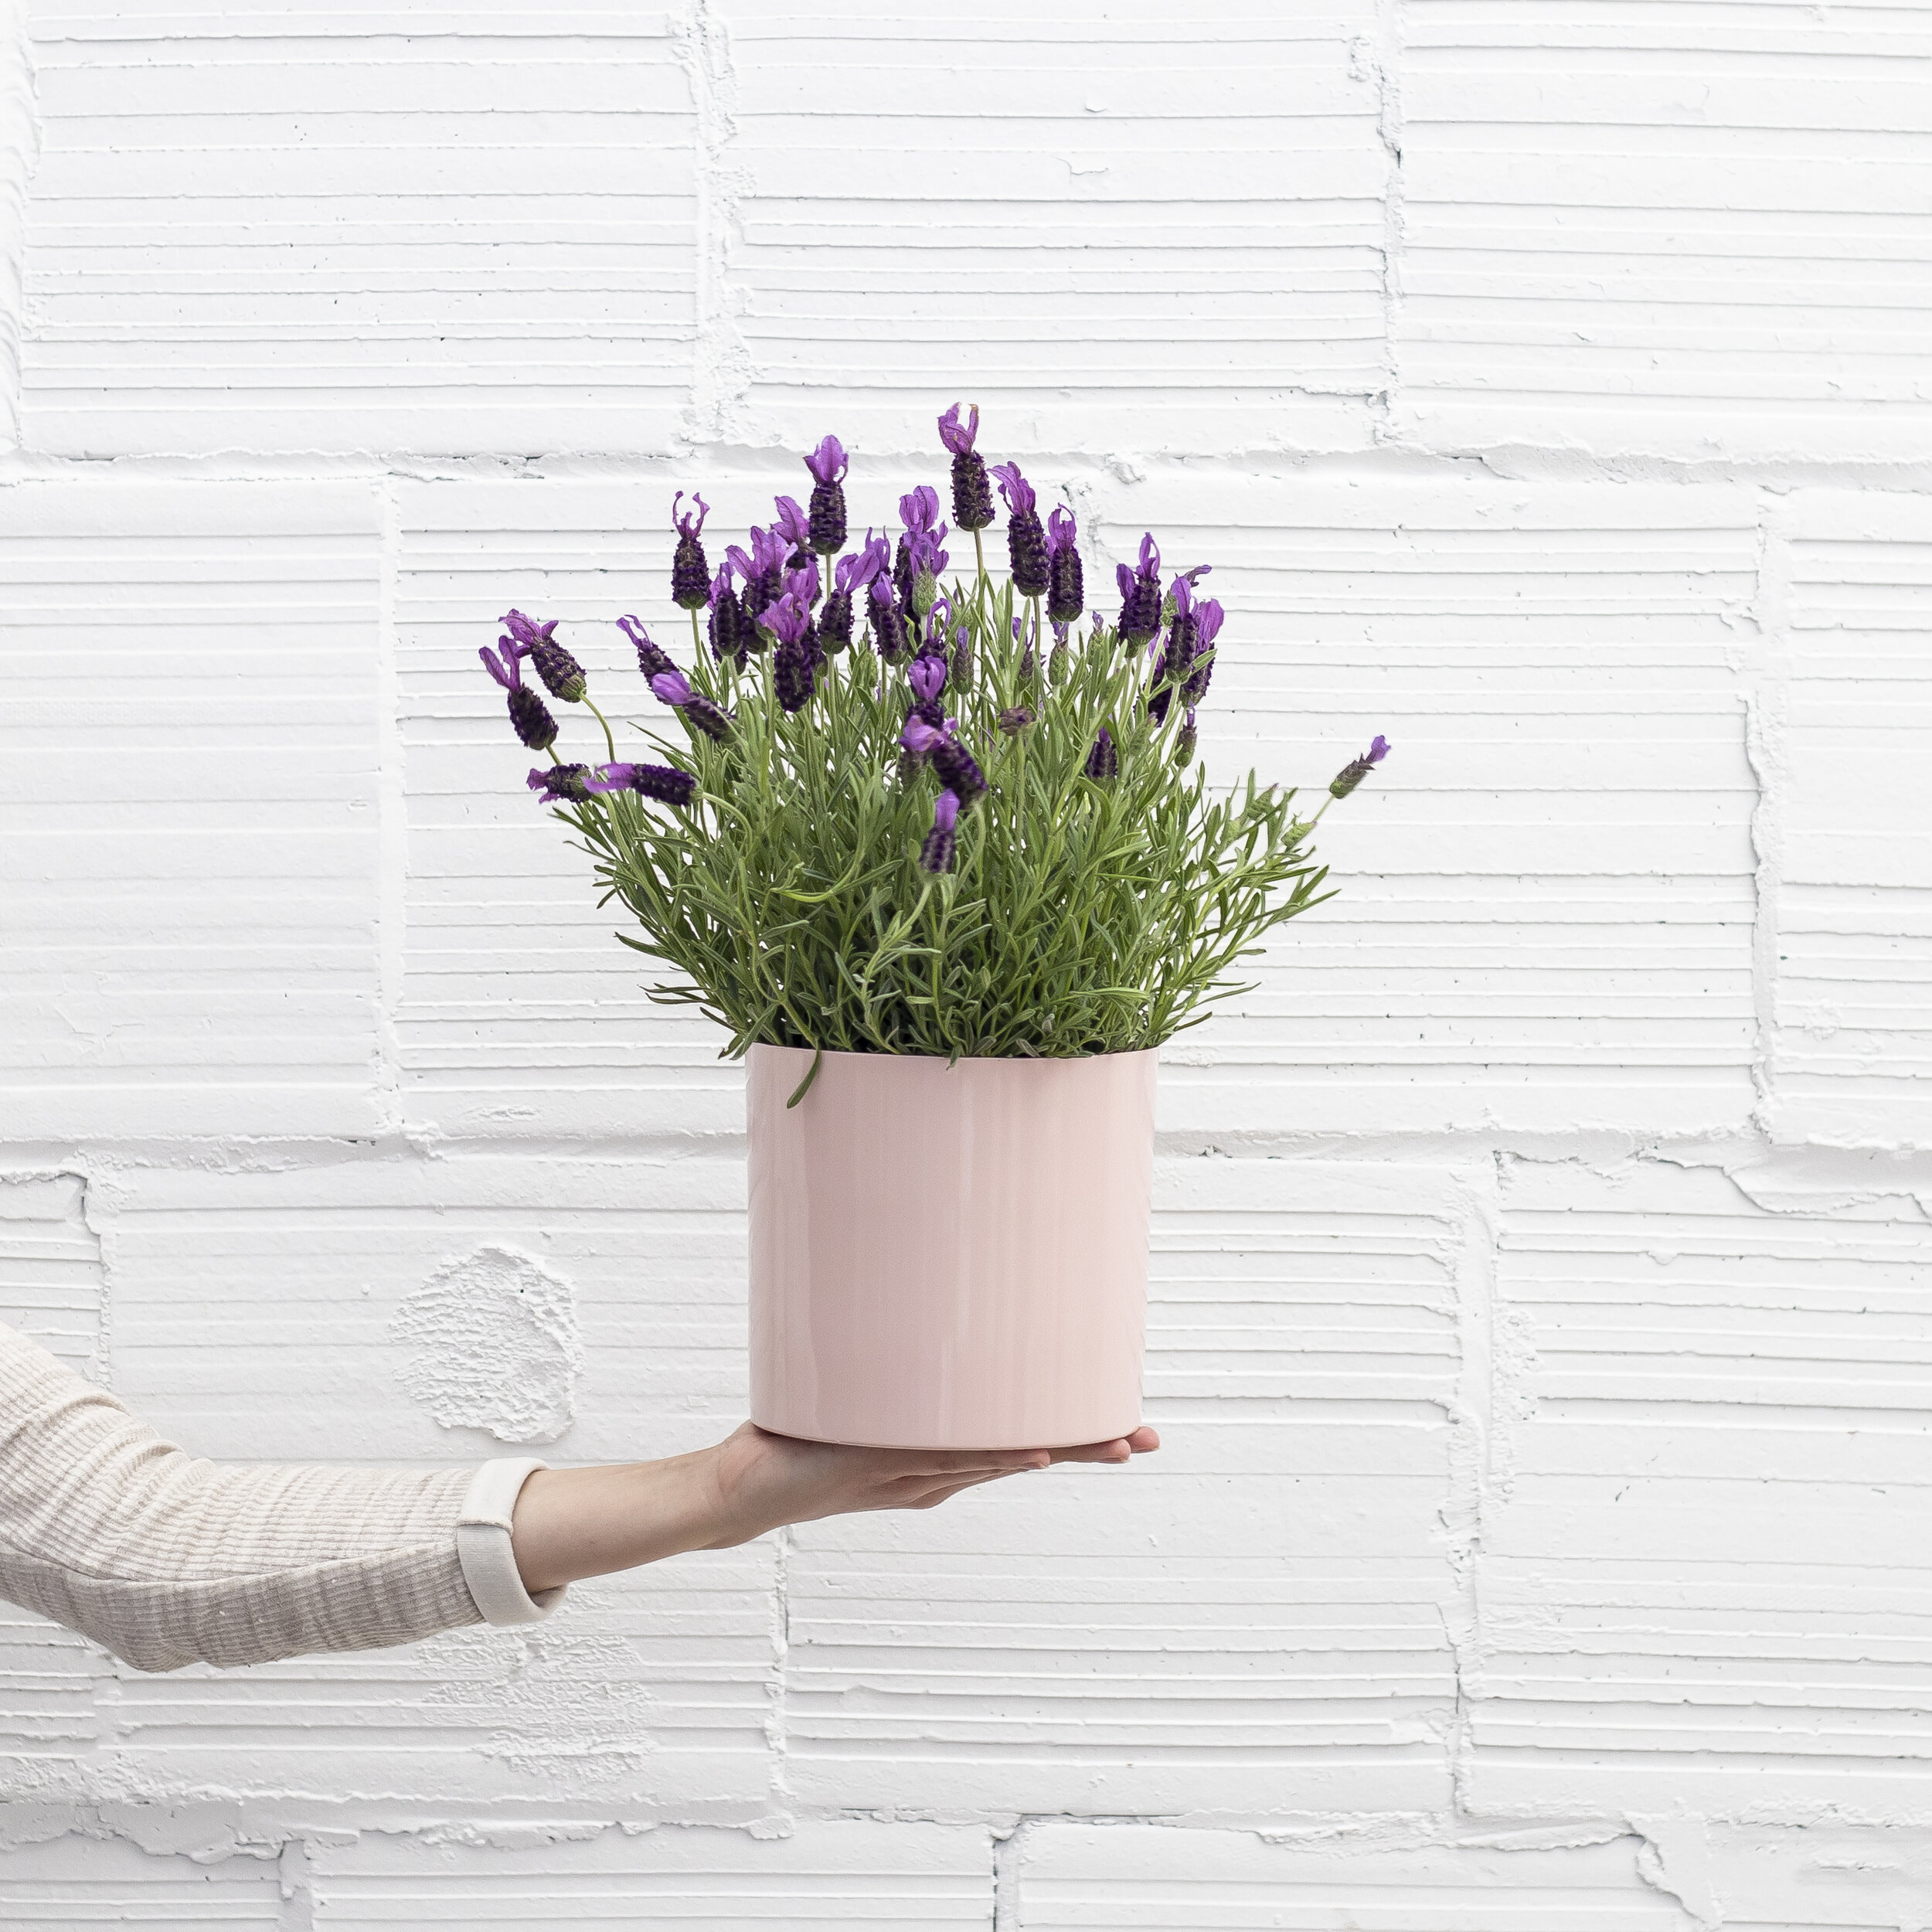 A Spanish Lavender plant in a blush colored pot being held up by a hand in front of a white concrete wall